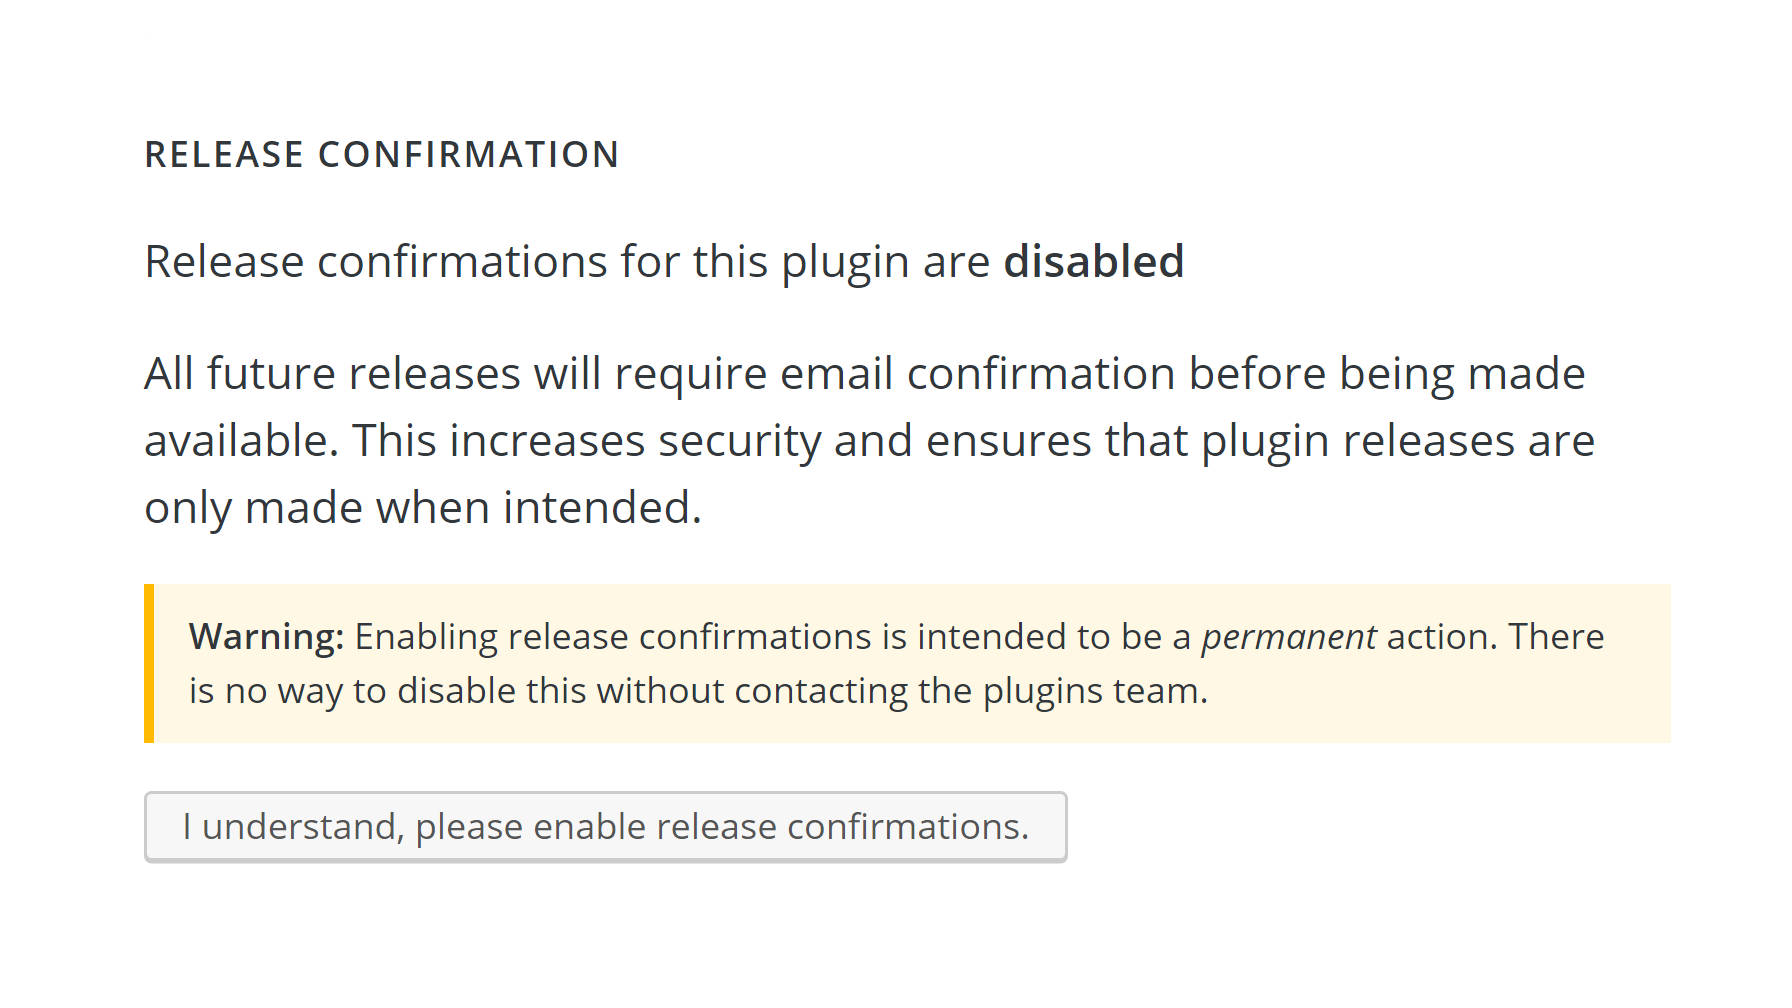 Screenshot of the plugin release confirmation email form.